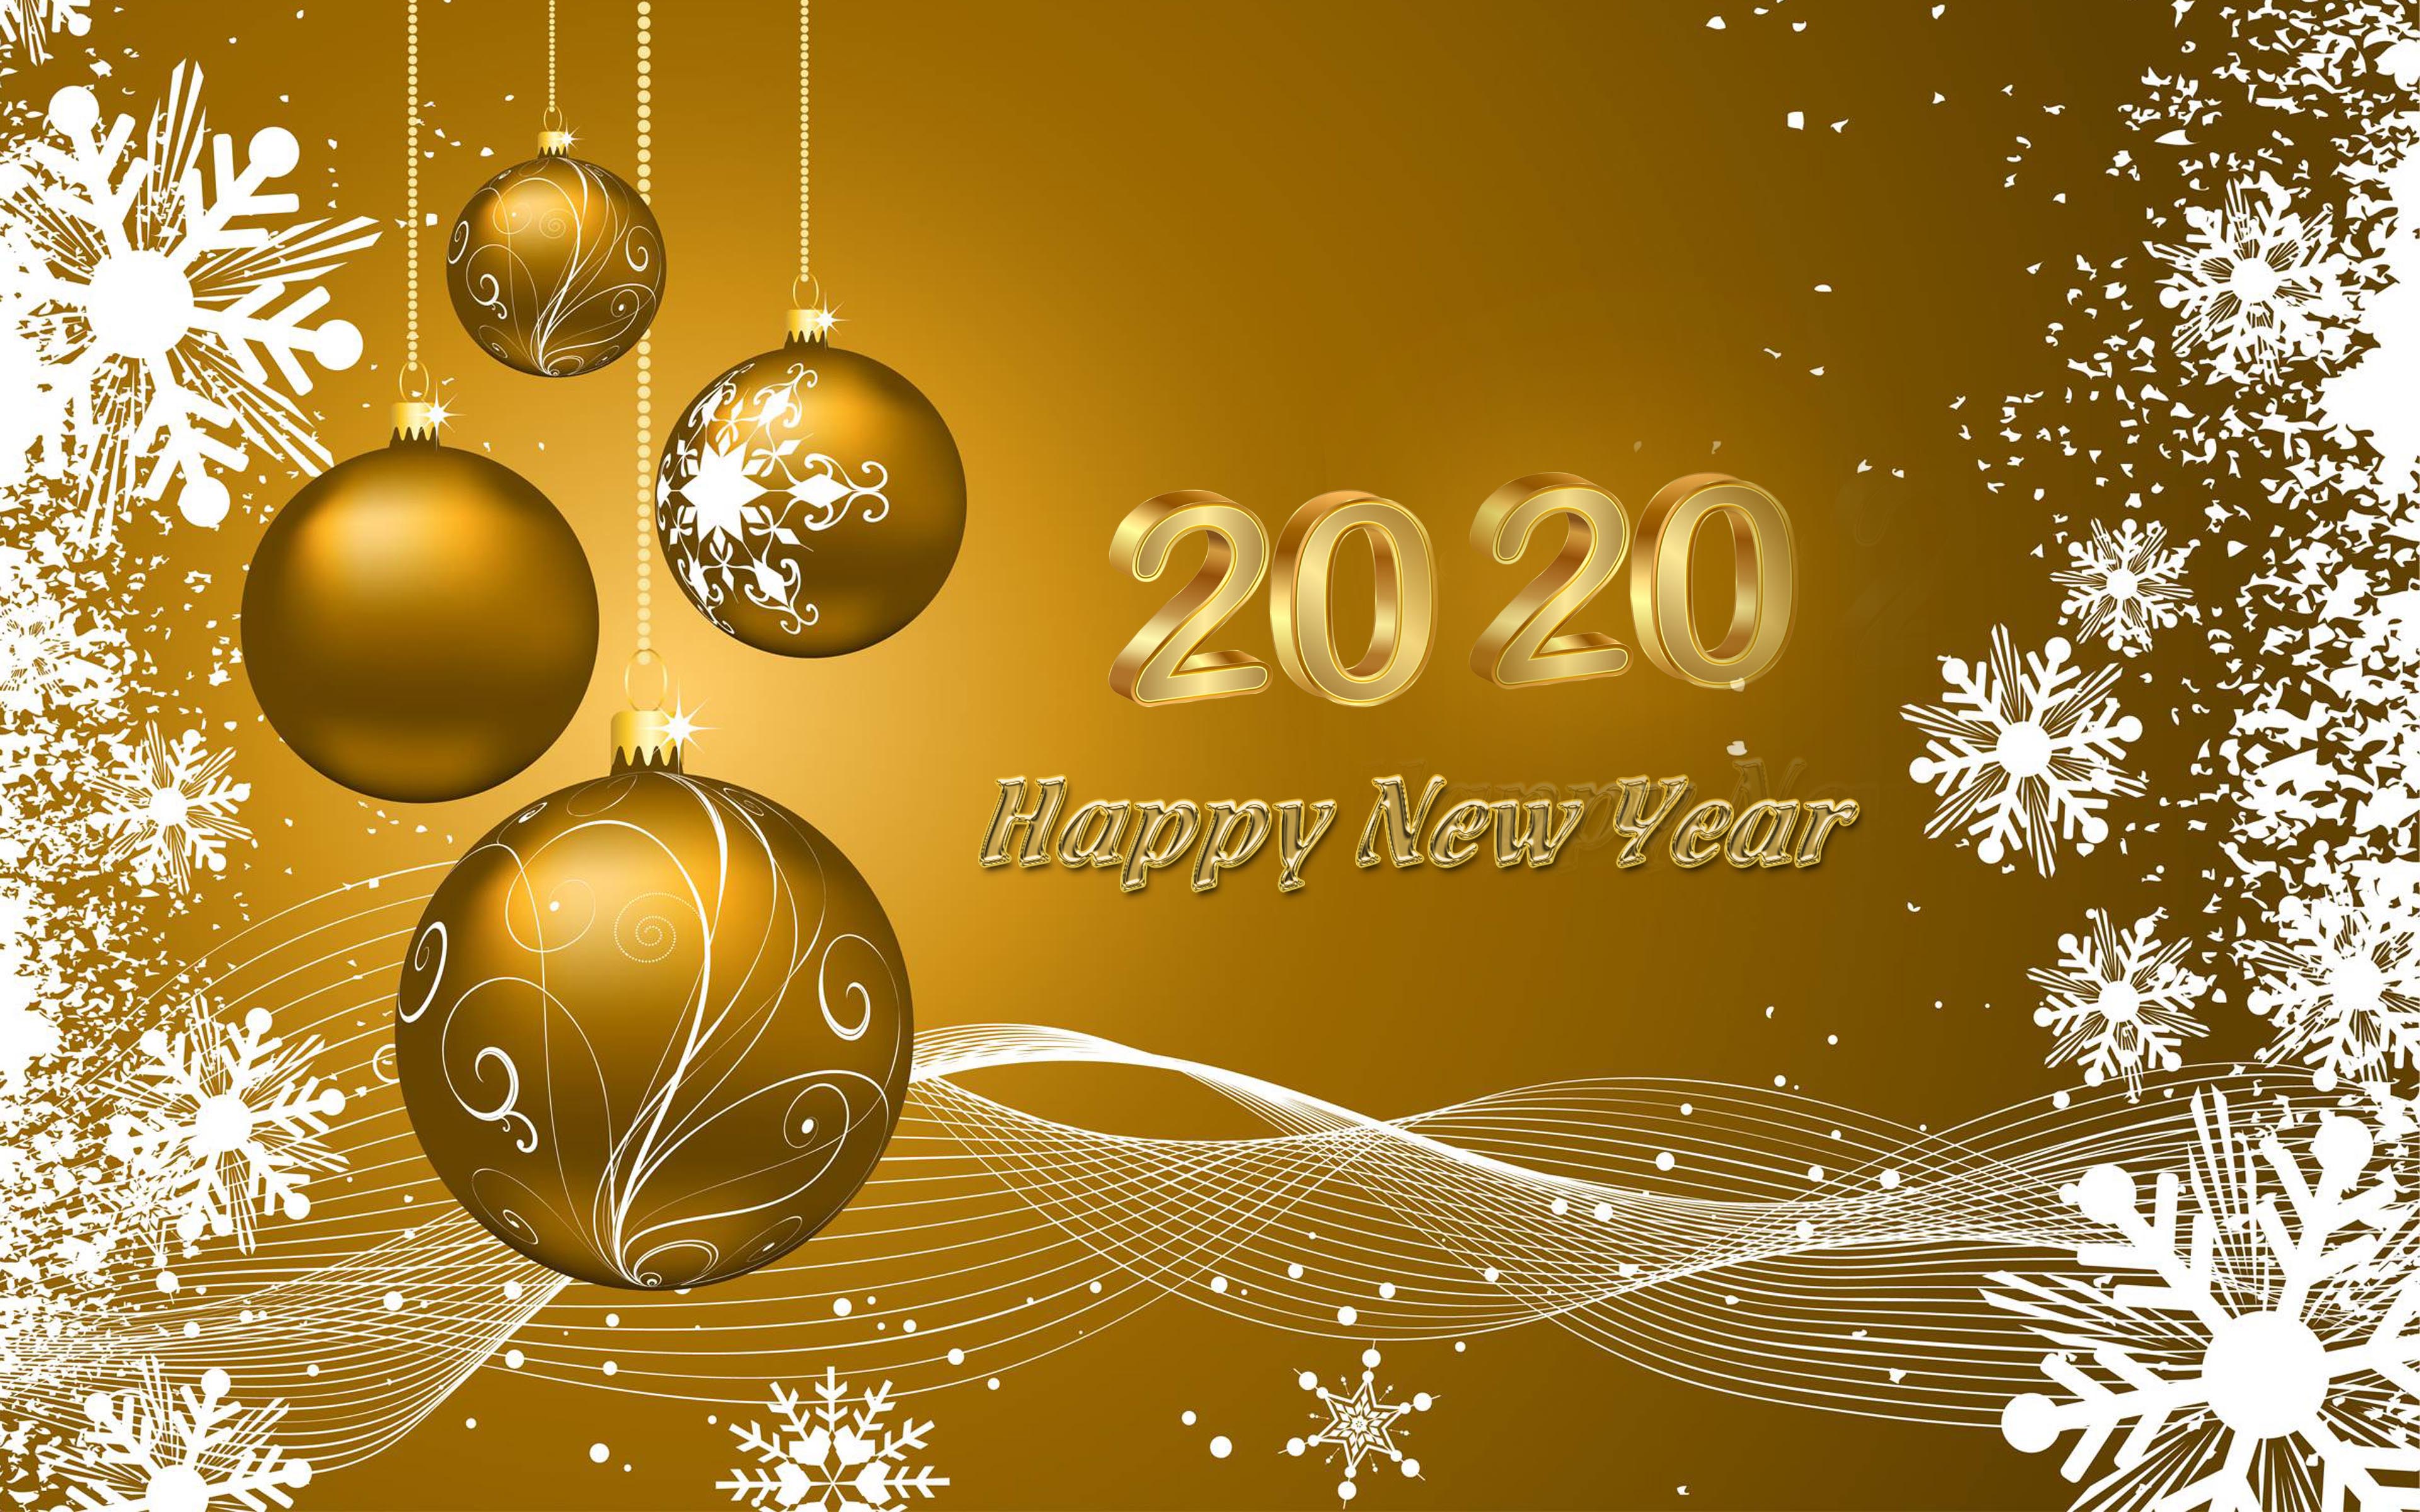 Happy New 2020 Year Wishes Gold Greeting Card & Quotes 4k